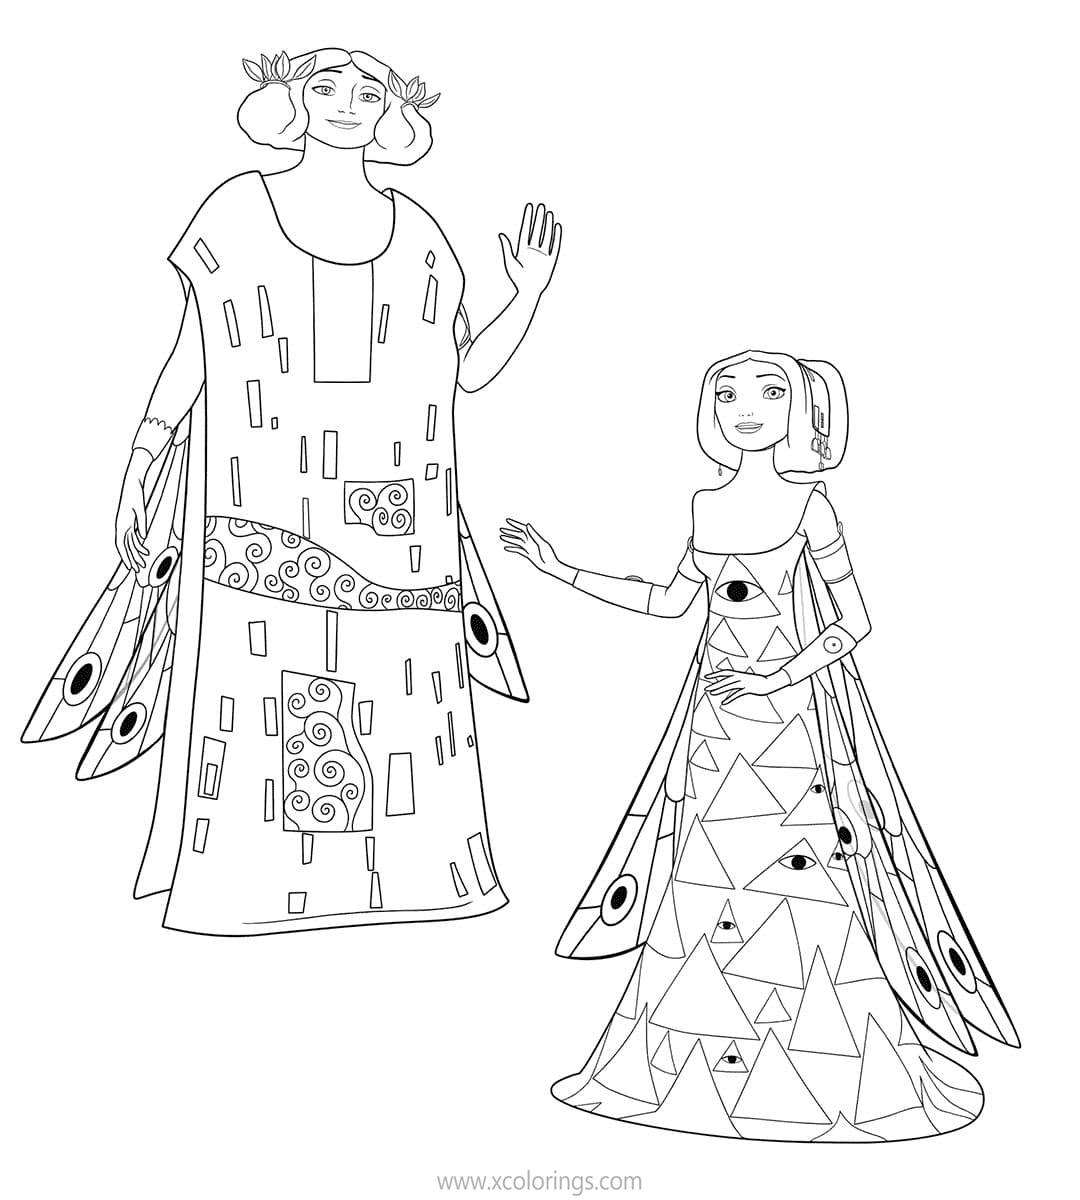 Free Mia And Me Coloring Pages King Ray and Queen Mayla printable